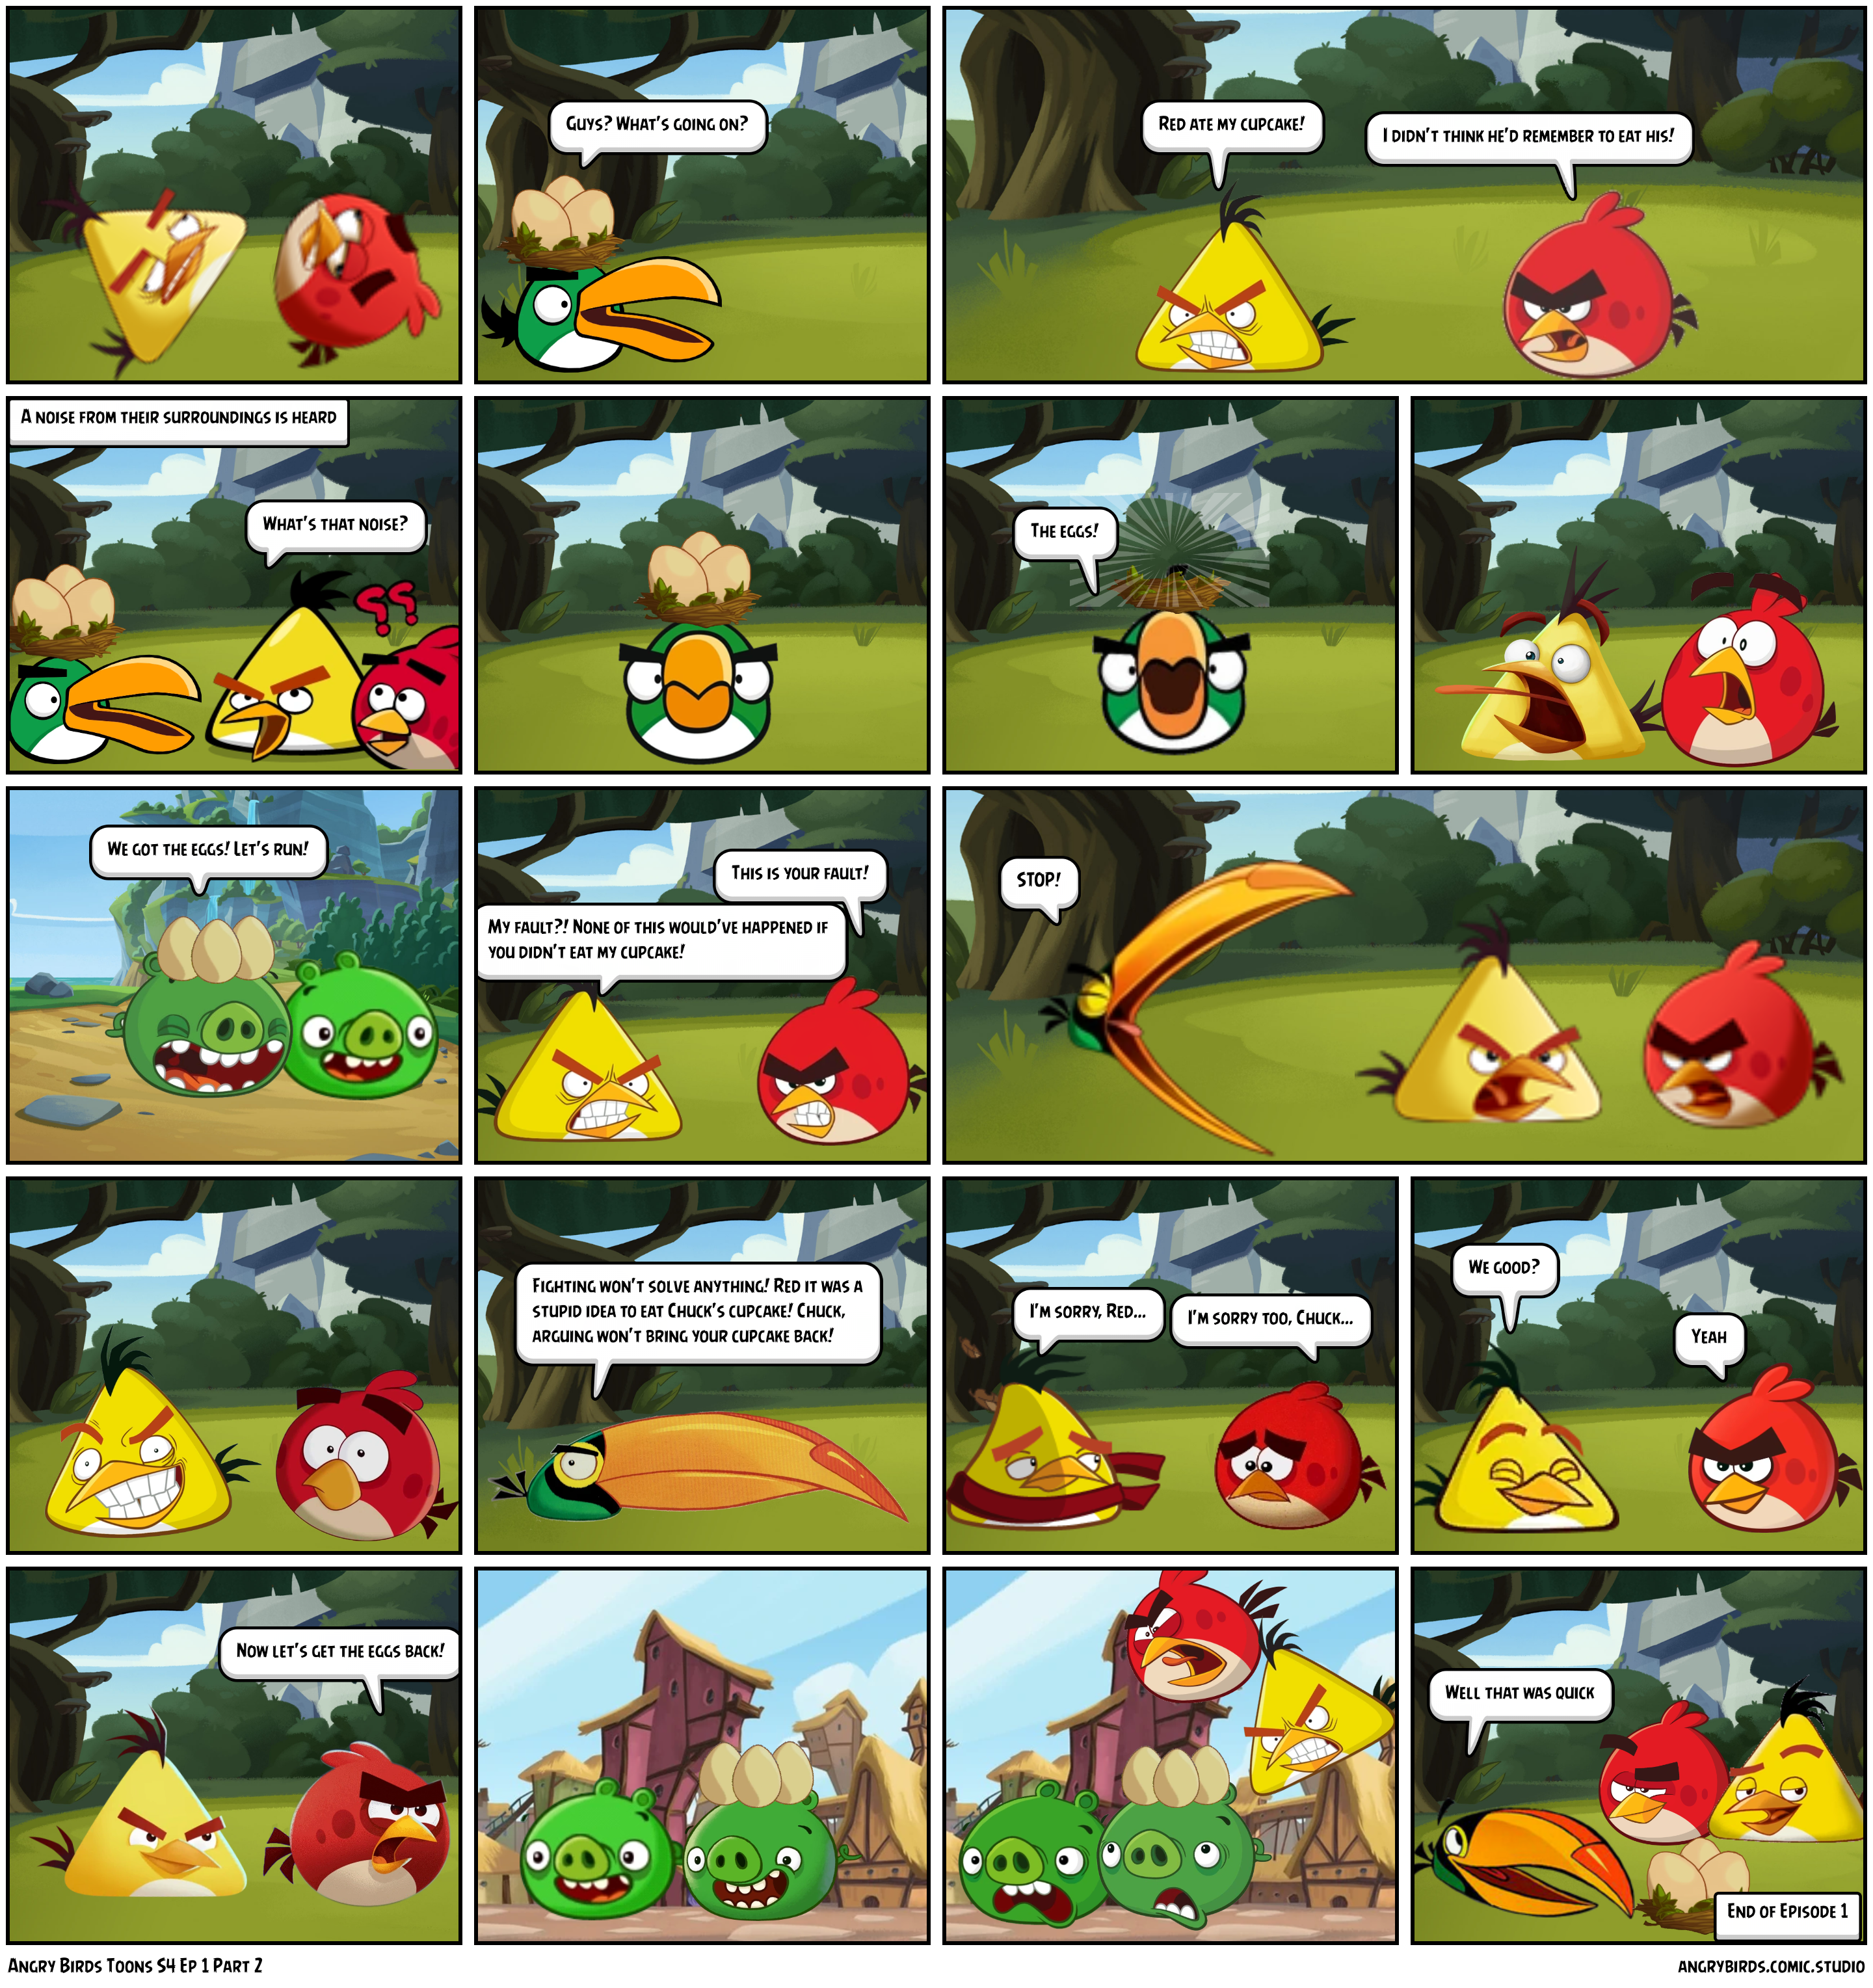 Angry Birds Toons S4 Ep 1 Part 2